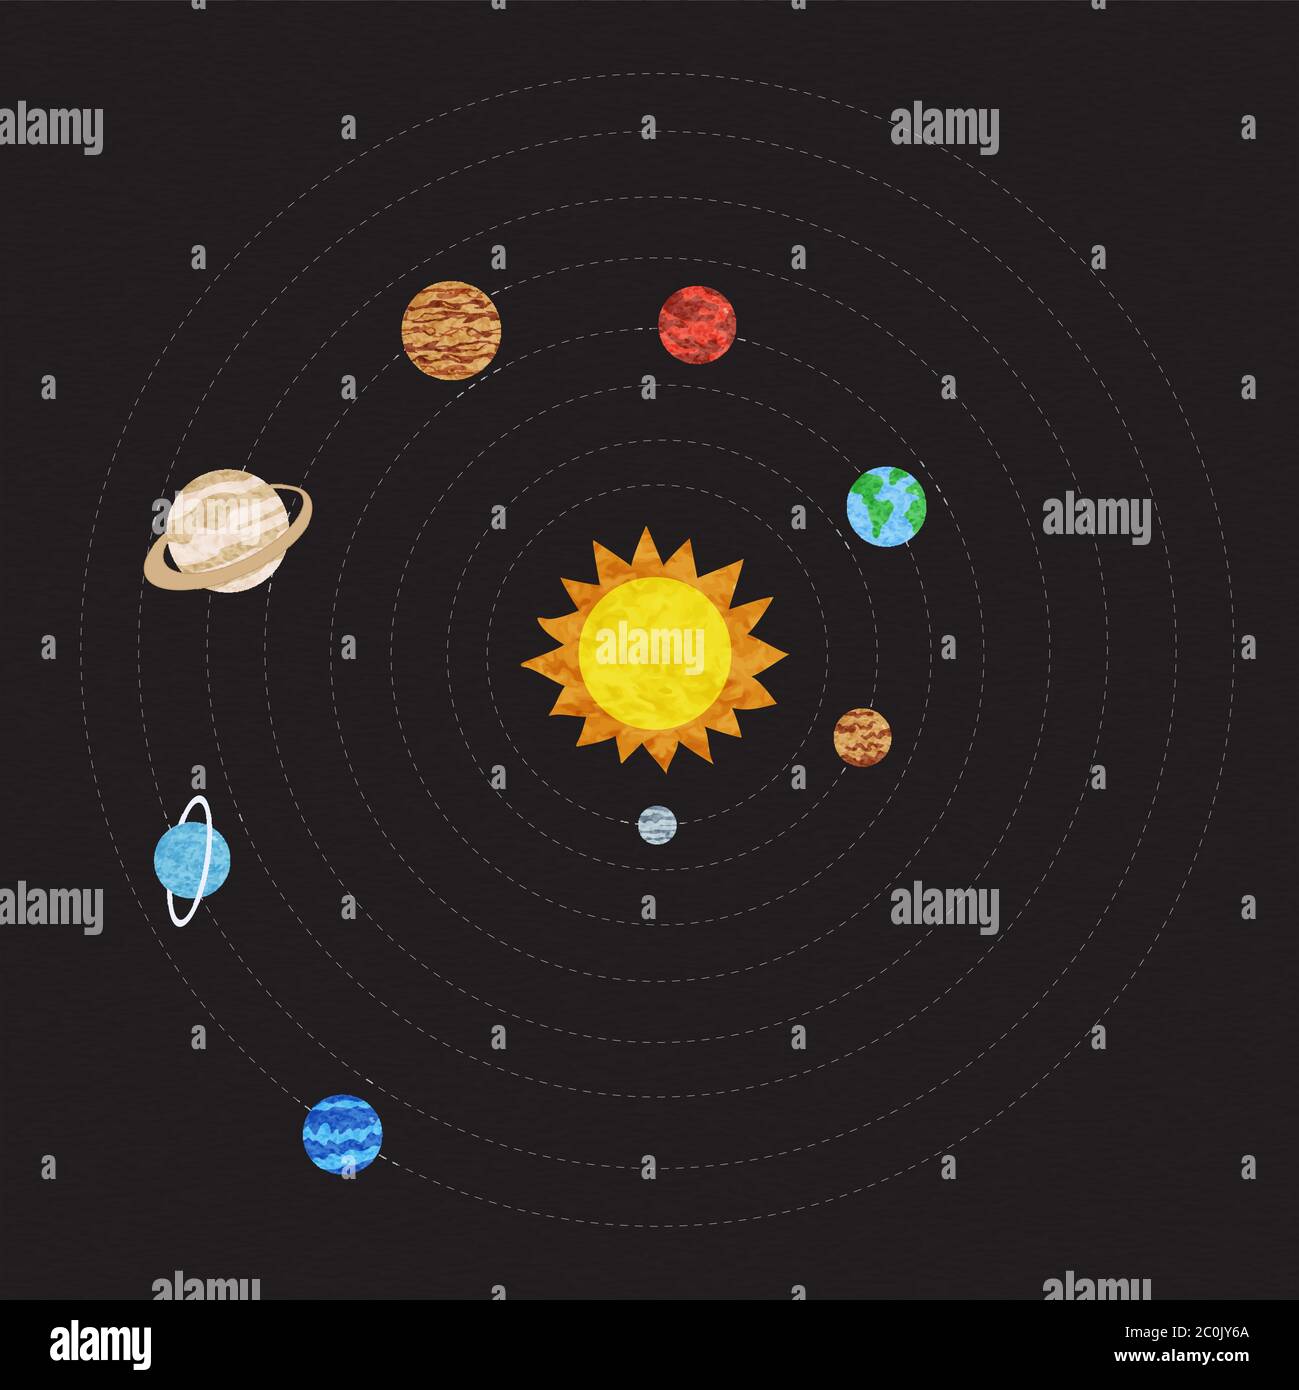 Solar system illustration of outer space planet orbit guide for astronomy education or galaxy exploration concept. Stock Vector